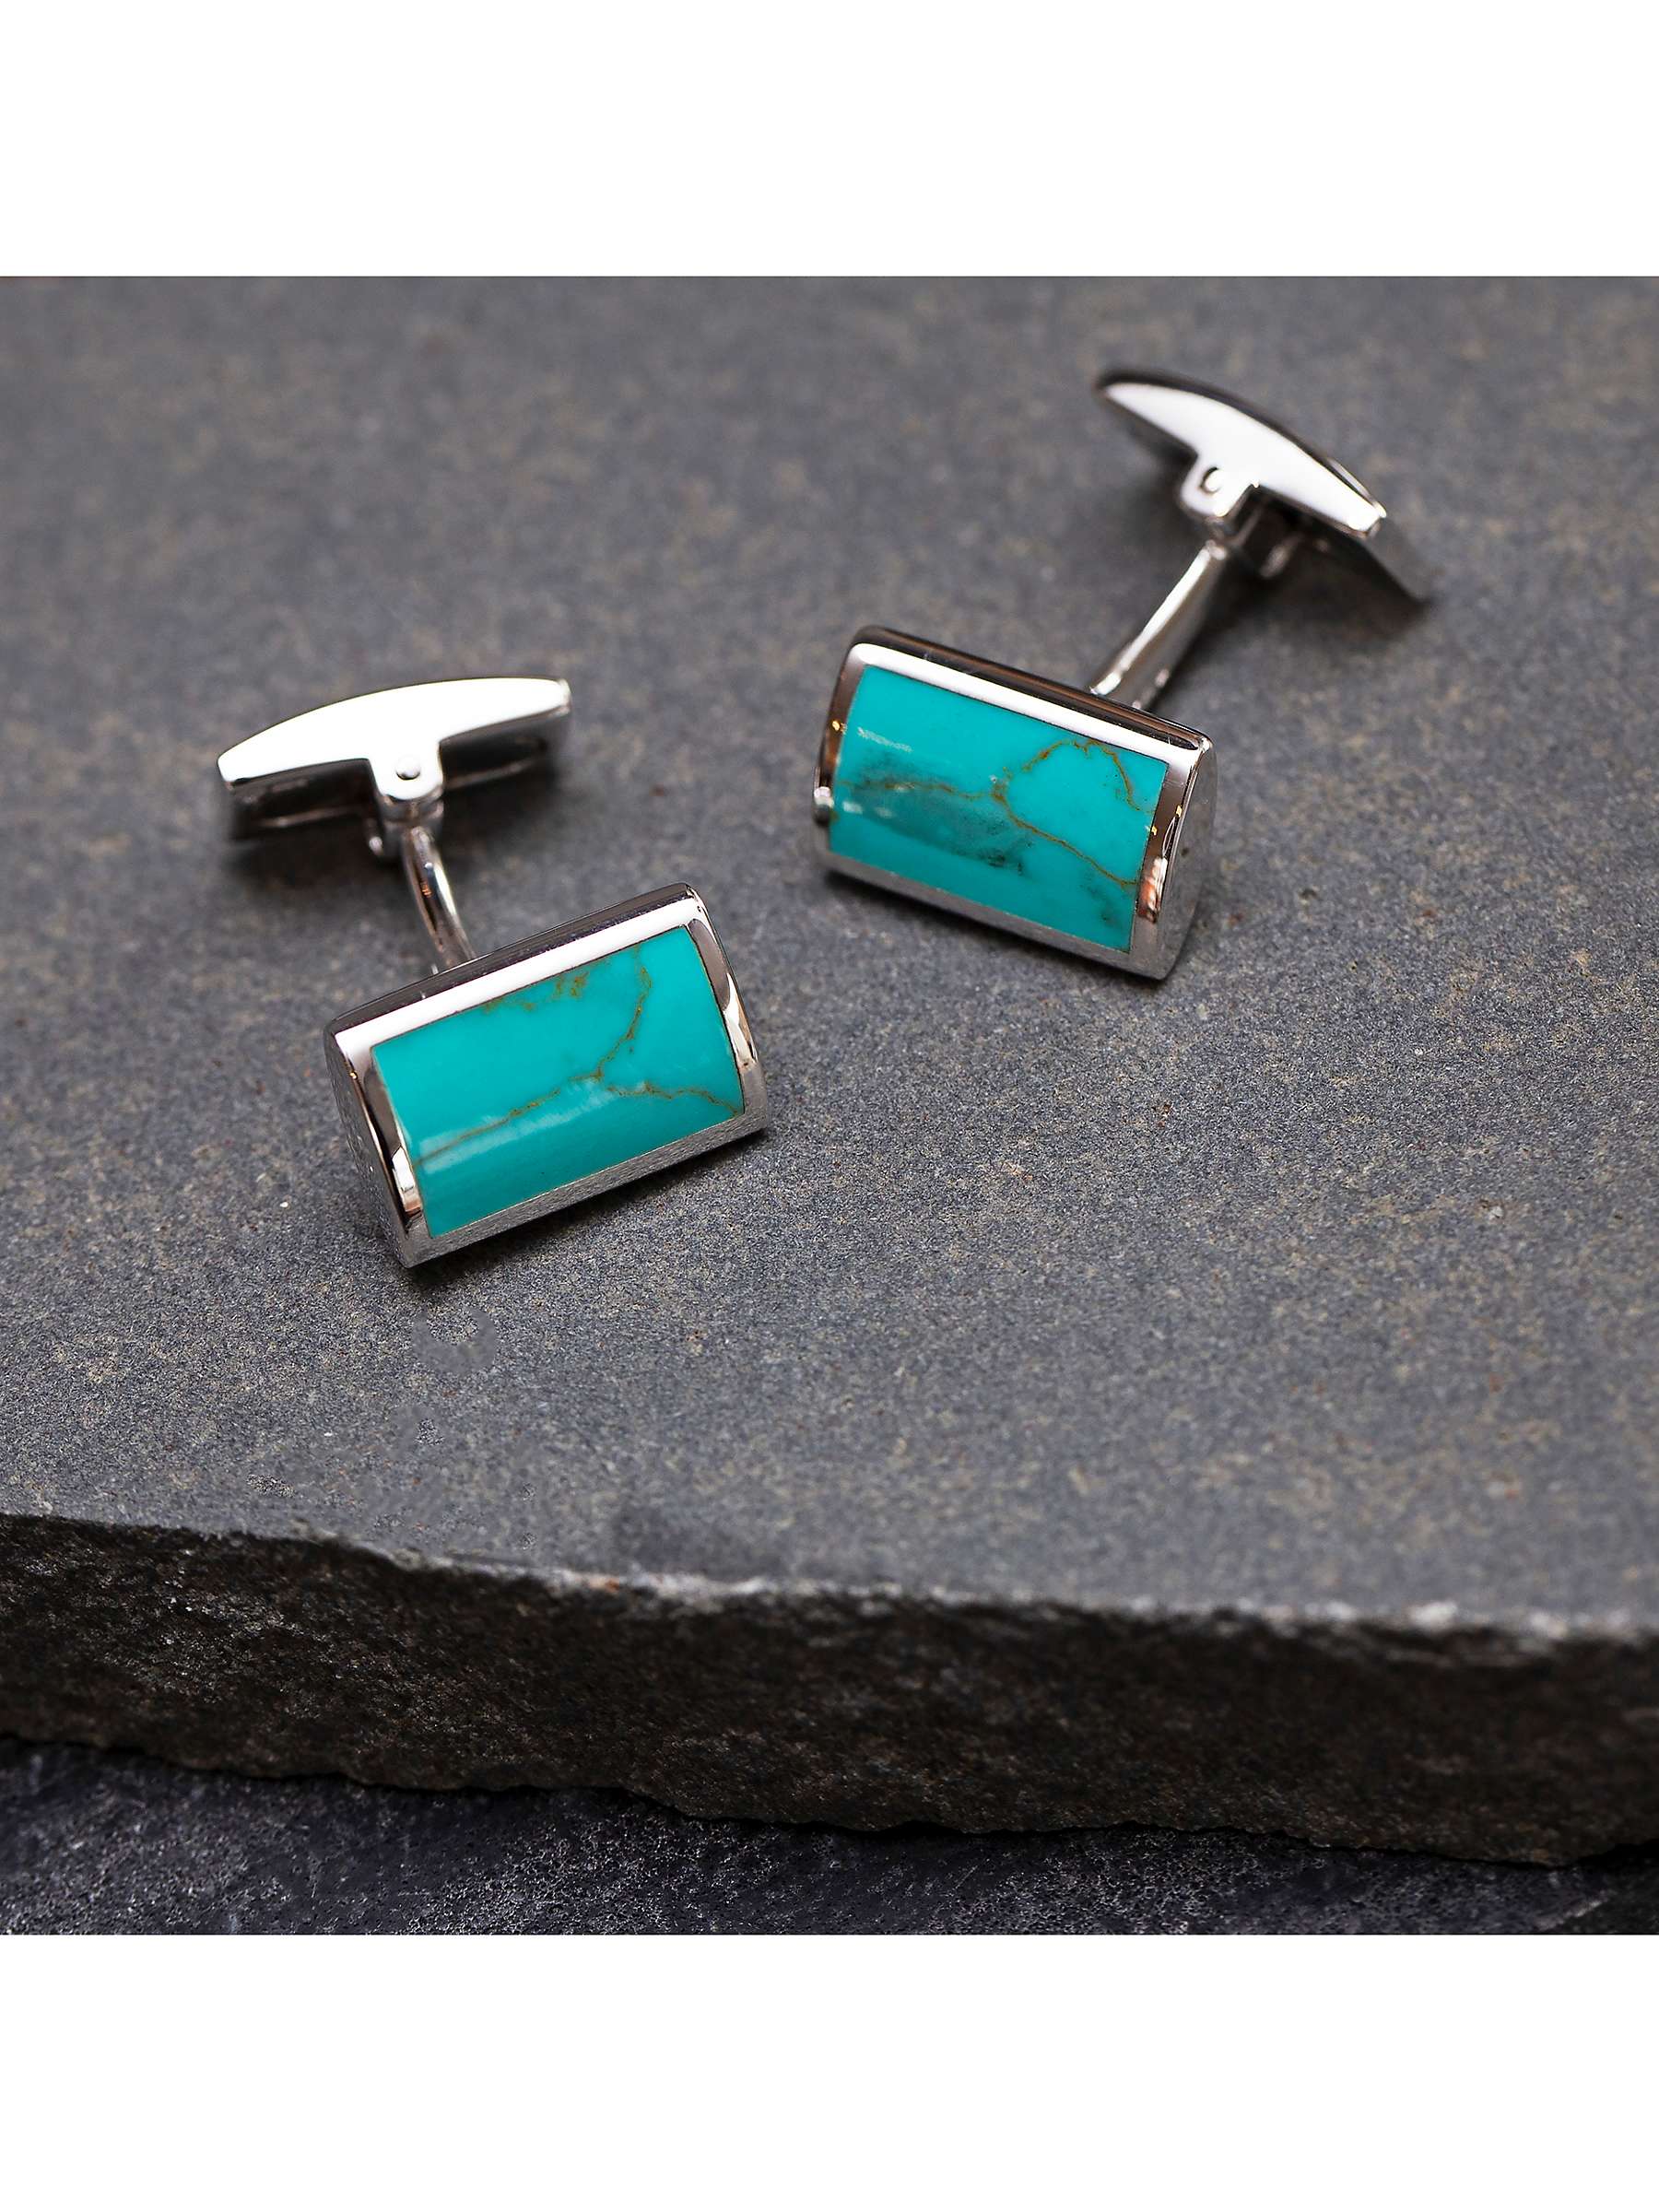 Buy Hoxton London Turquoise Rectangle Cufflinks, Silver/Blue Online at johnlewis.com